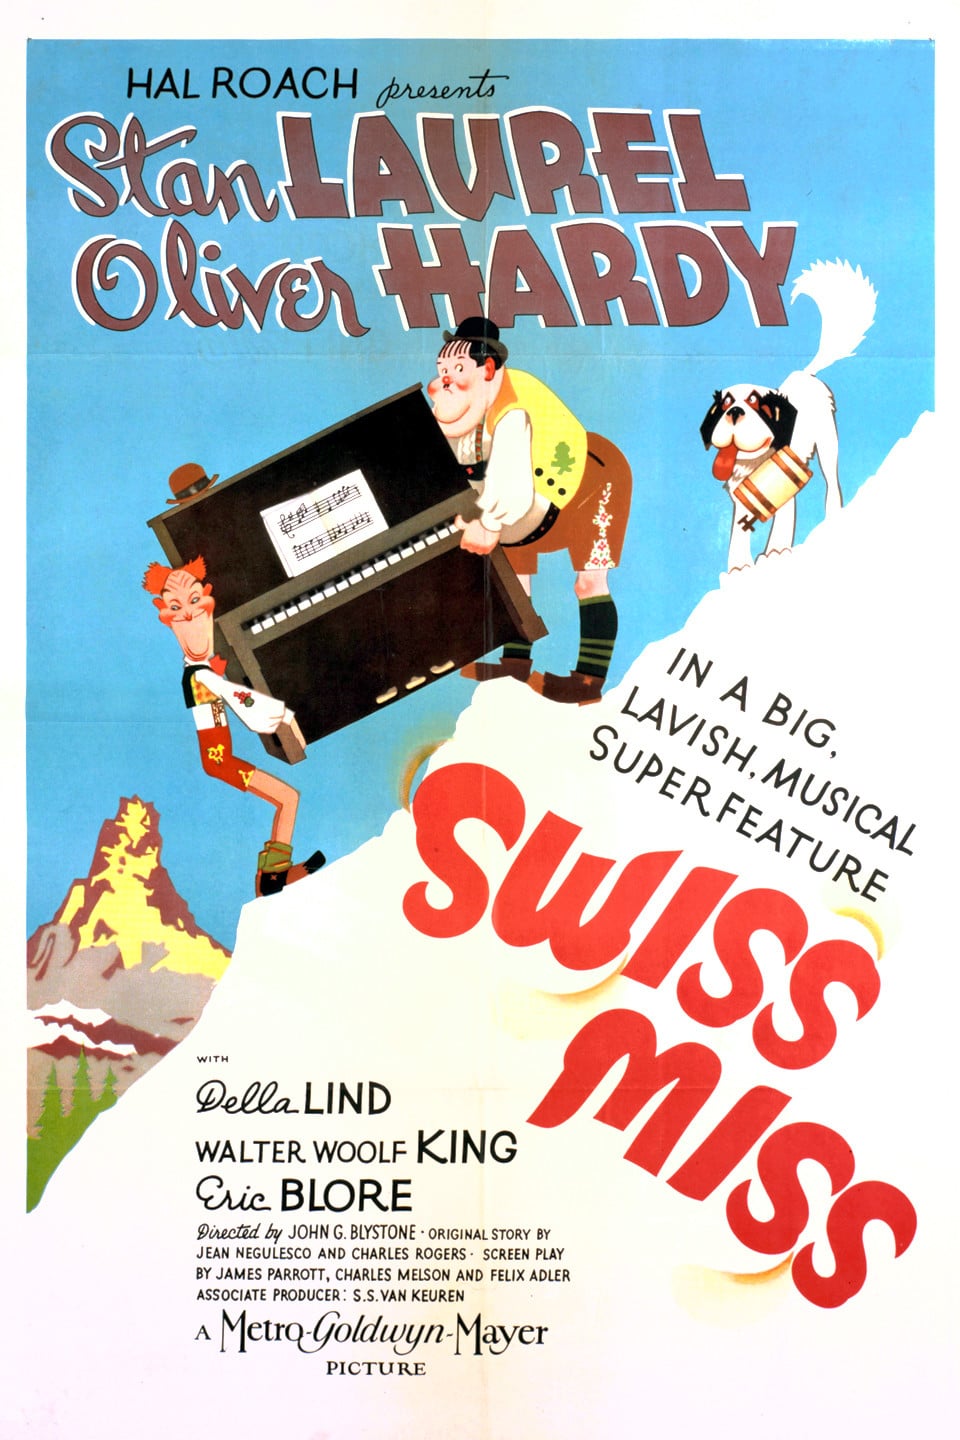 Poster for the movie "Swiss Miss"